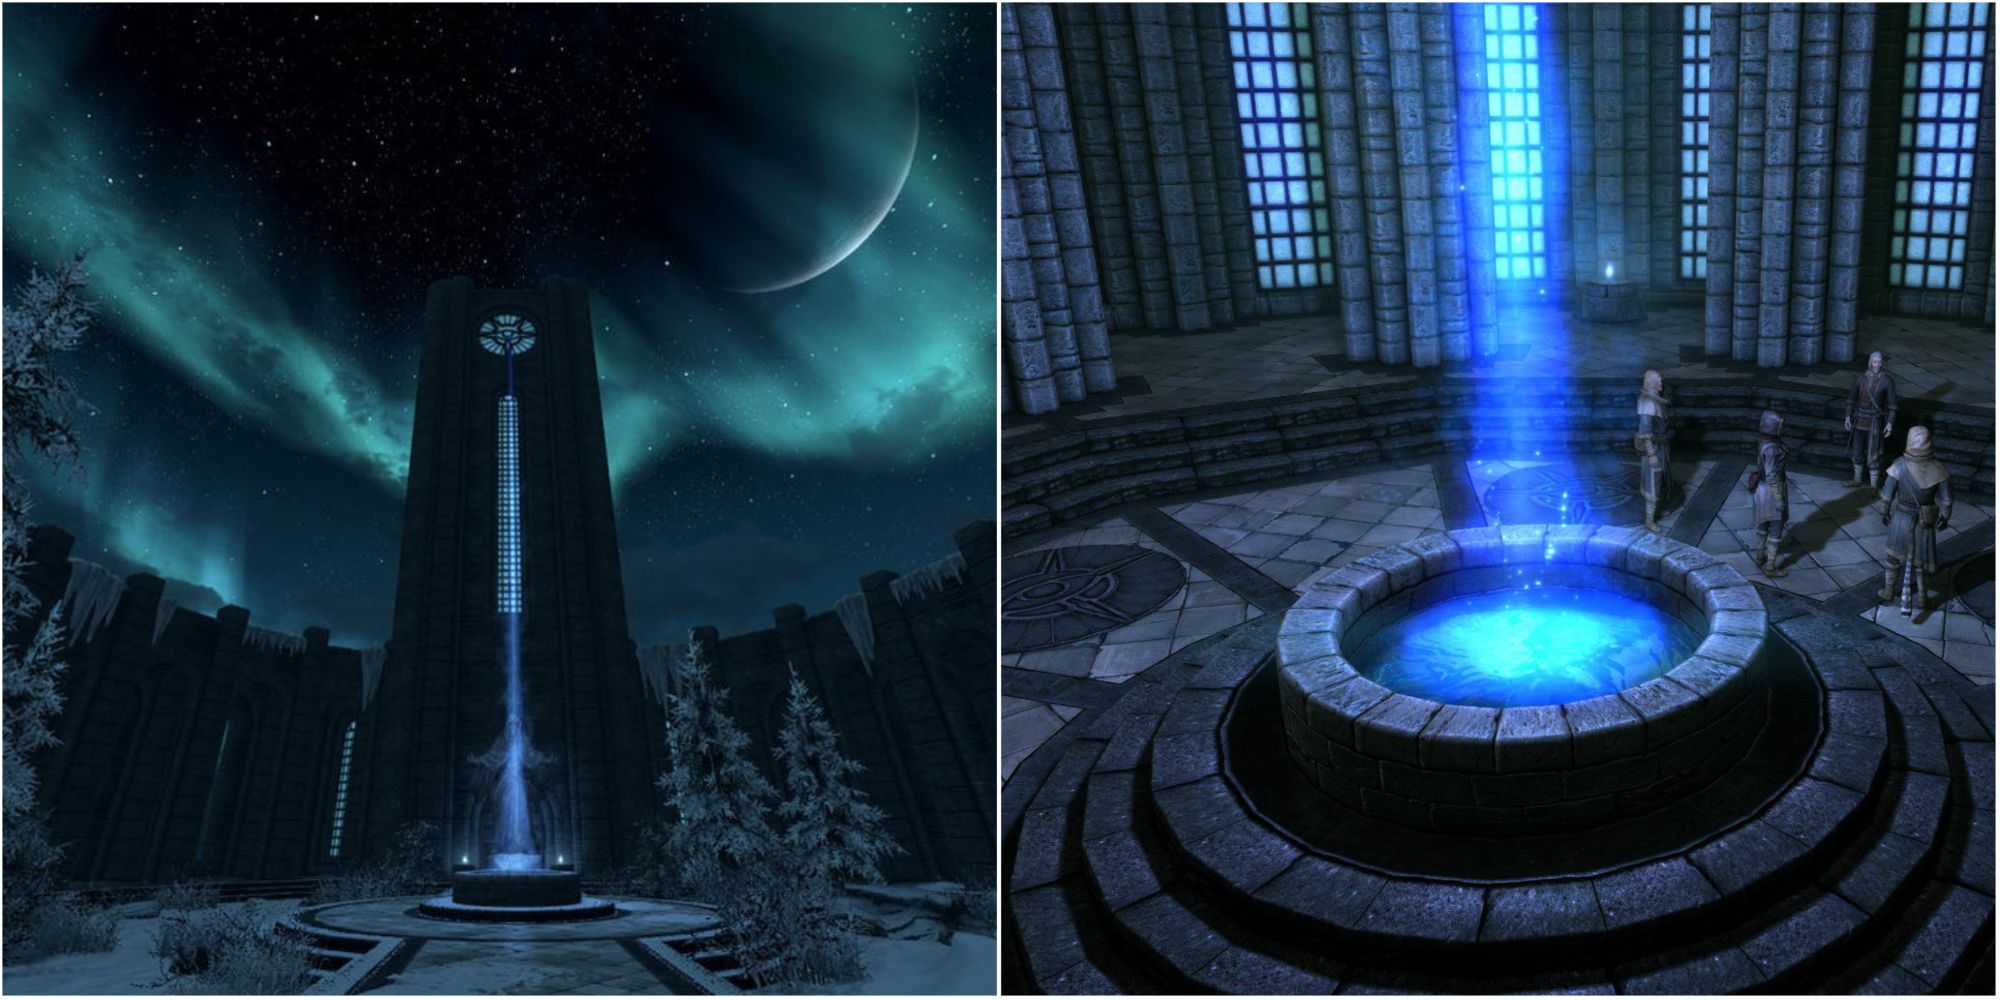 Collage of the outside courtyard of the College of Winterhold and mages conducting magic in the school in Skyrim